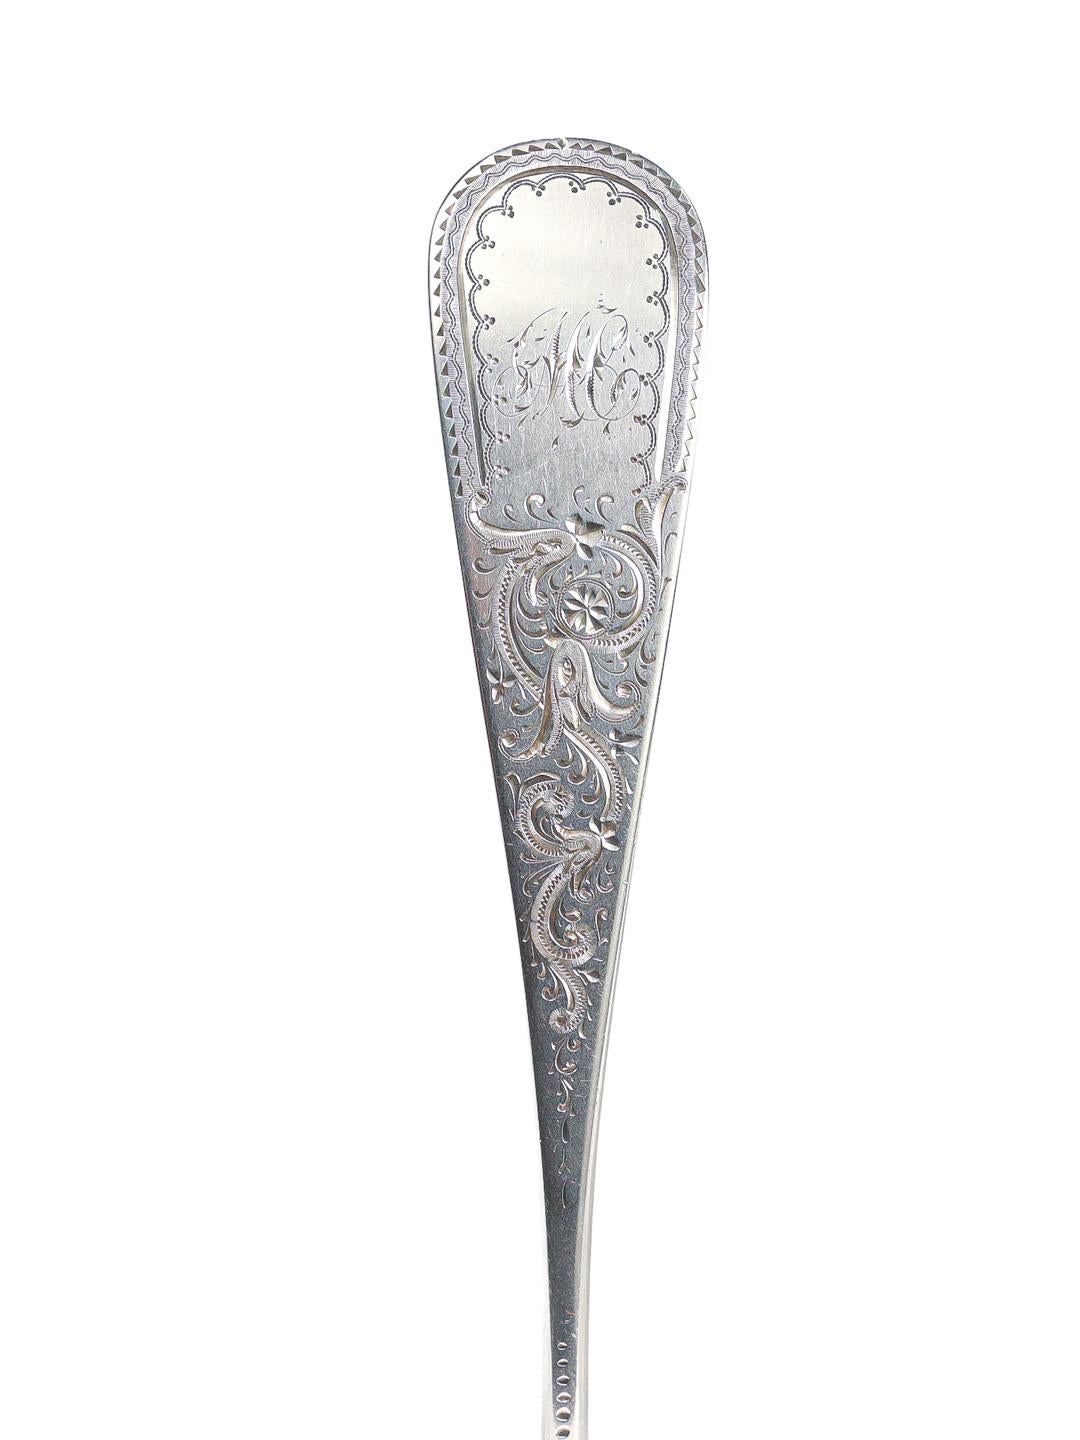 American Aesthetic Period R. & W. Wilson Brite Cut Sterling Silver Serving Spoon For Sale 7